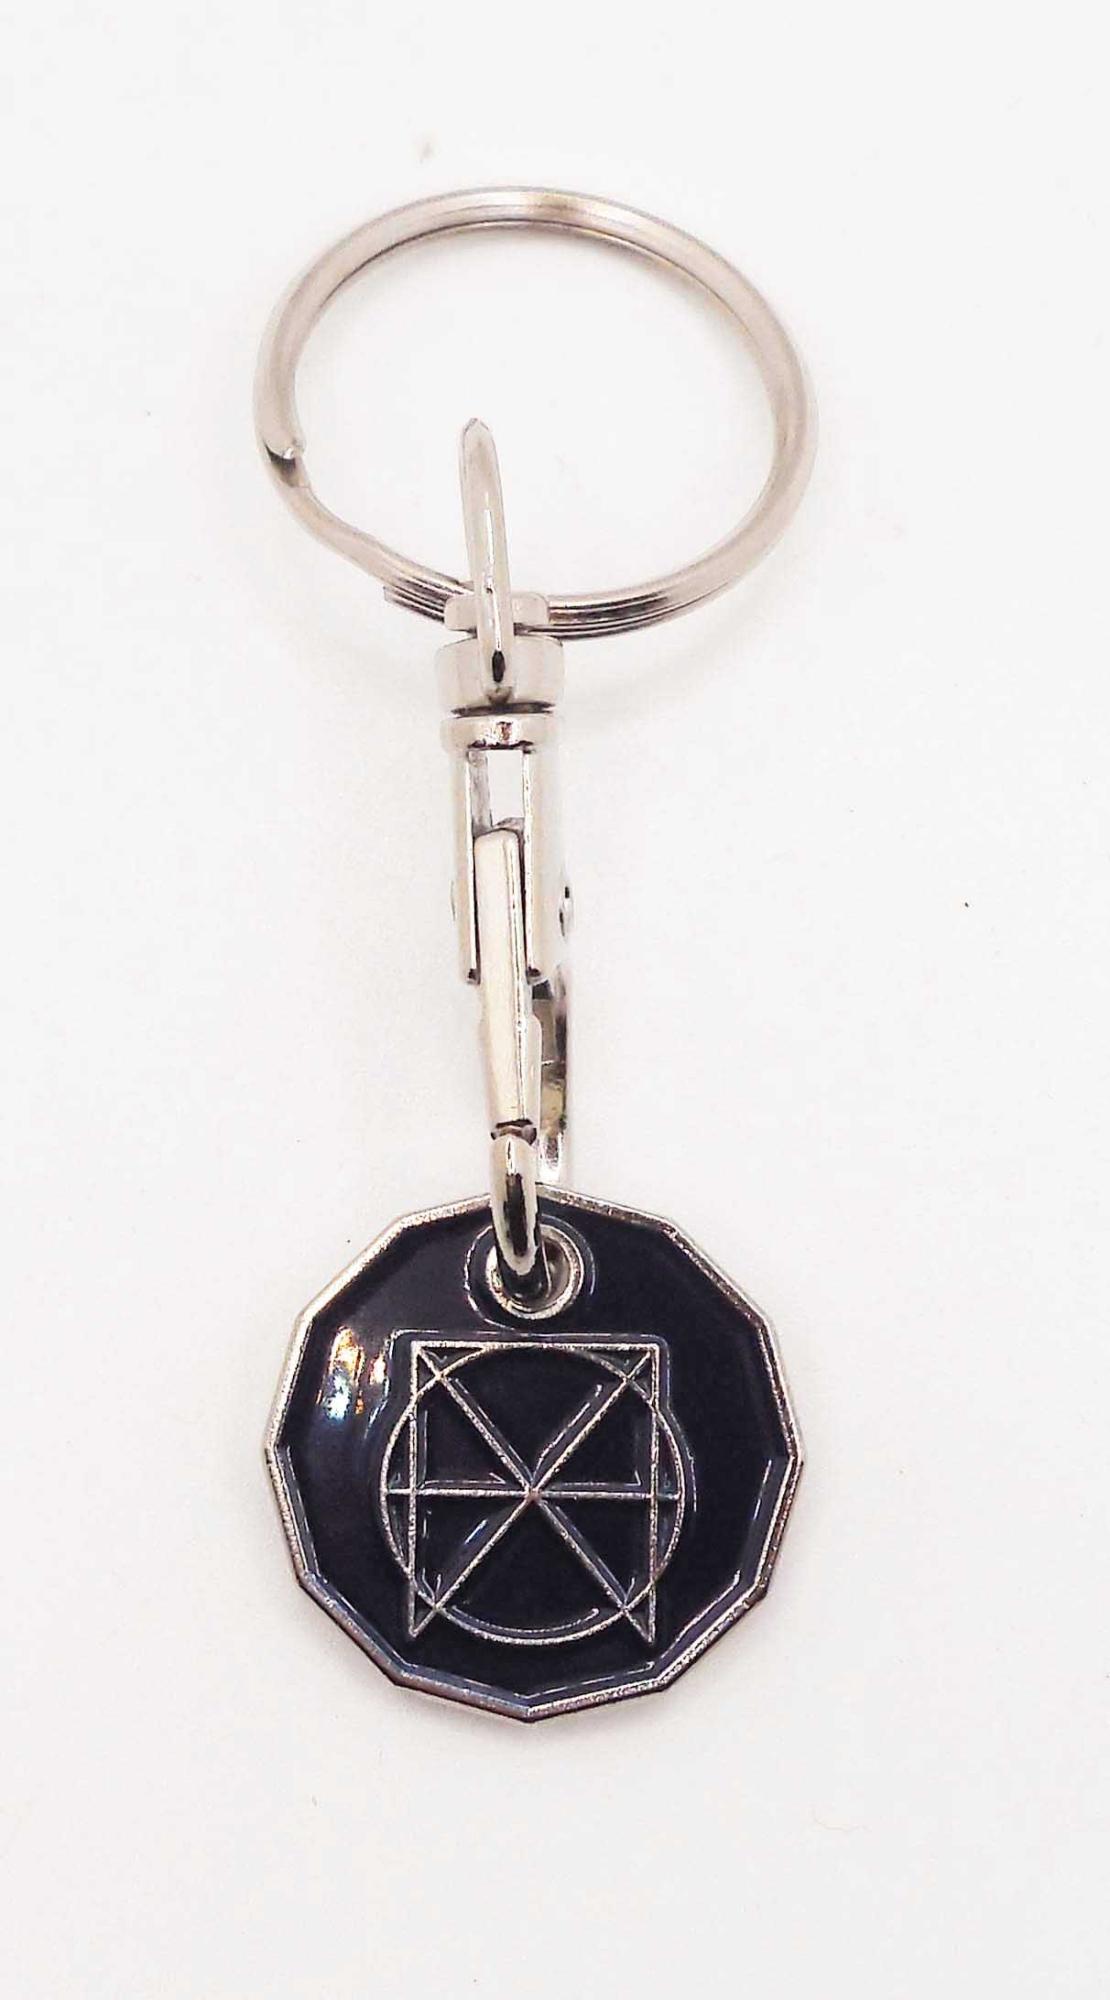 MoF Trolley Token, Museum collection, at the Shop at Freemasons' Hall